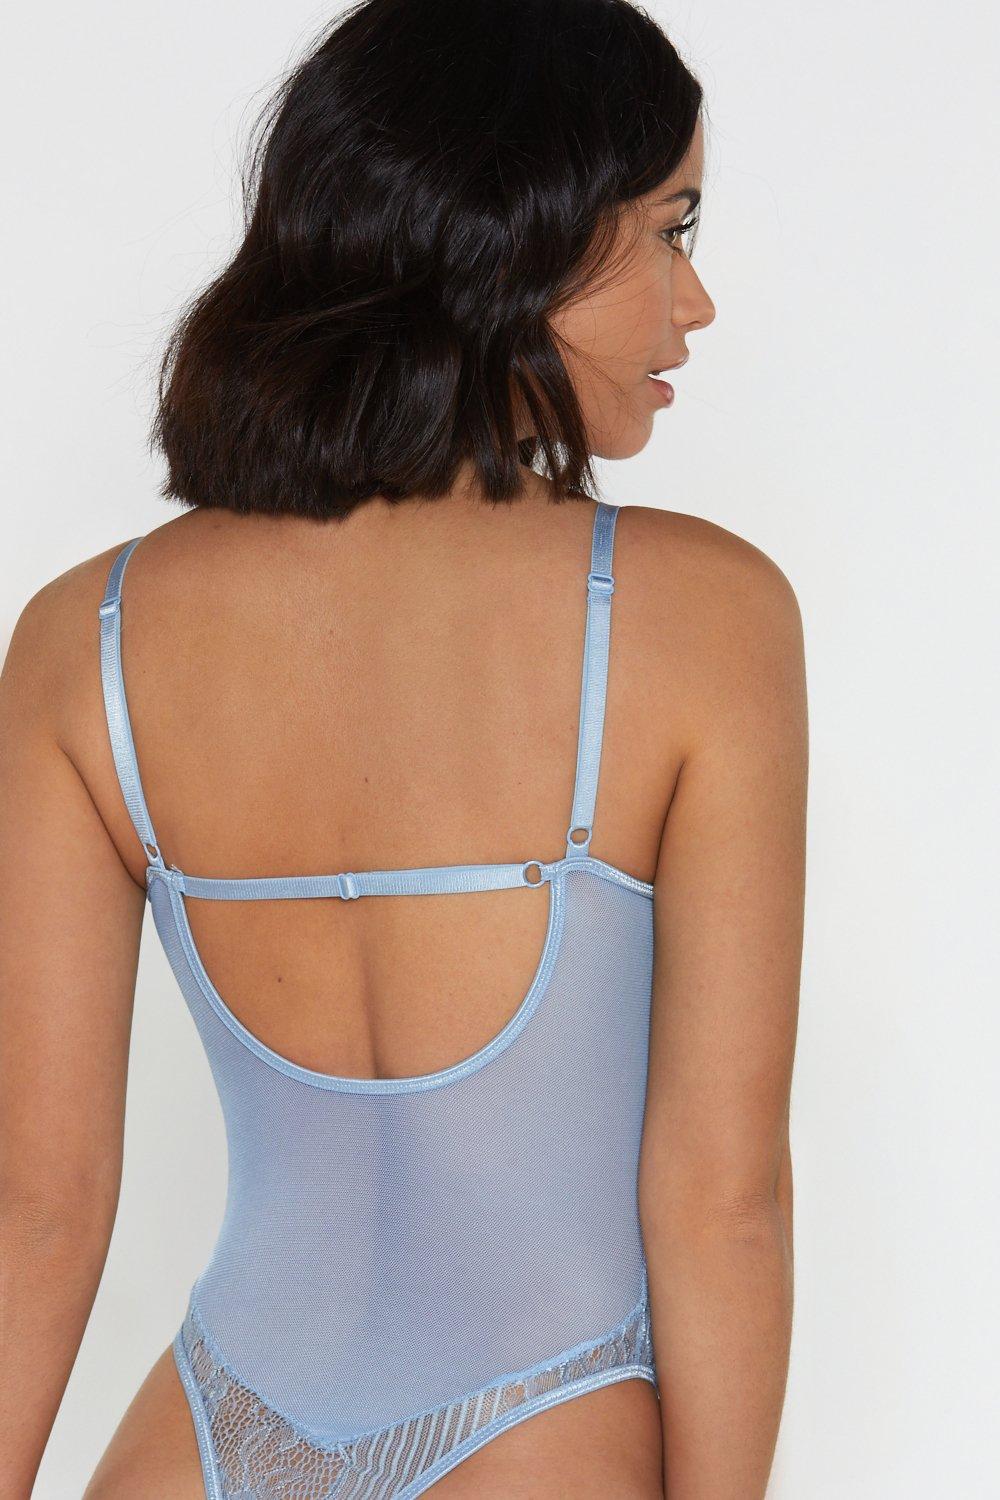 https://media.nastygal.com/i/nastygal/agg73143_blue_xl_2/lace-orders-cupped-bodysuit